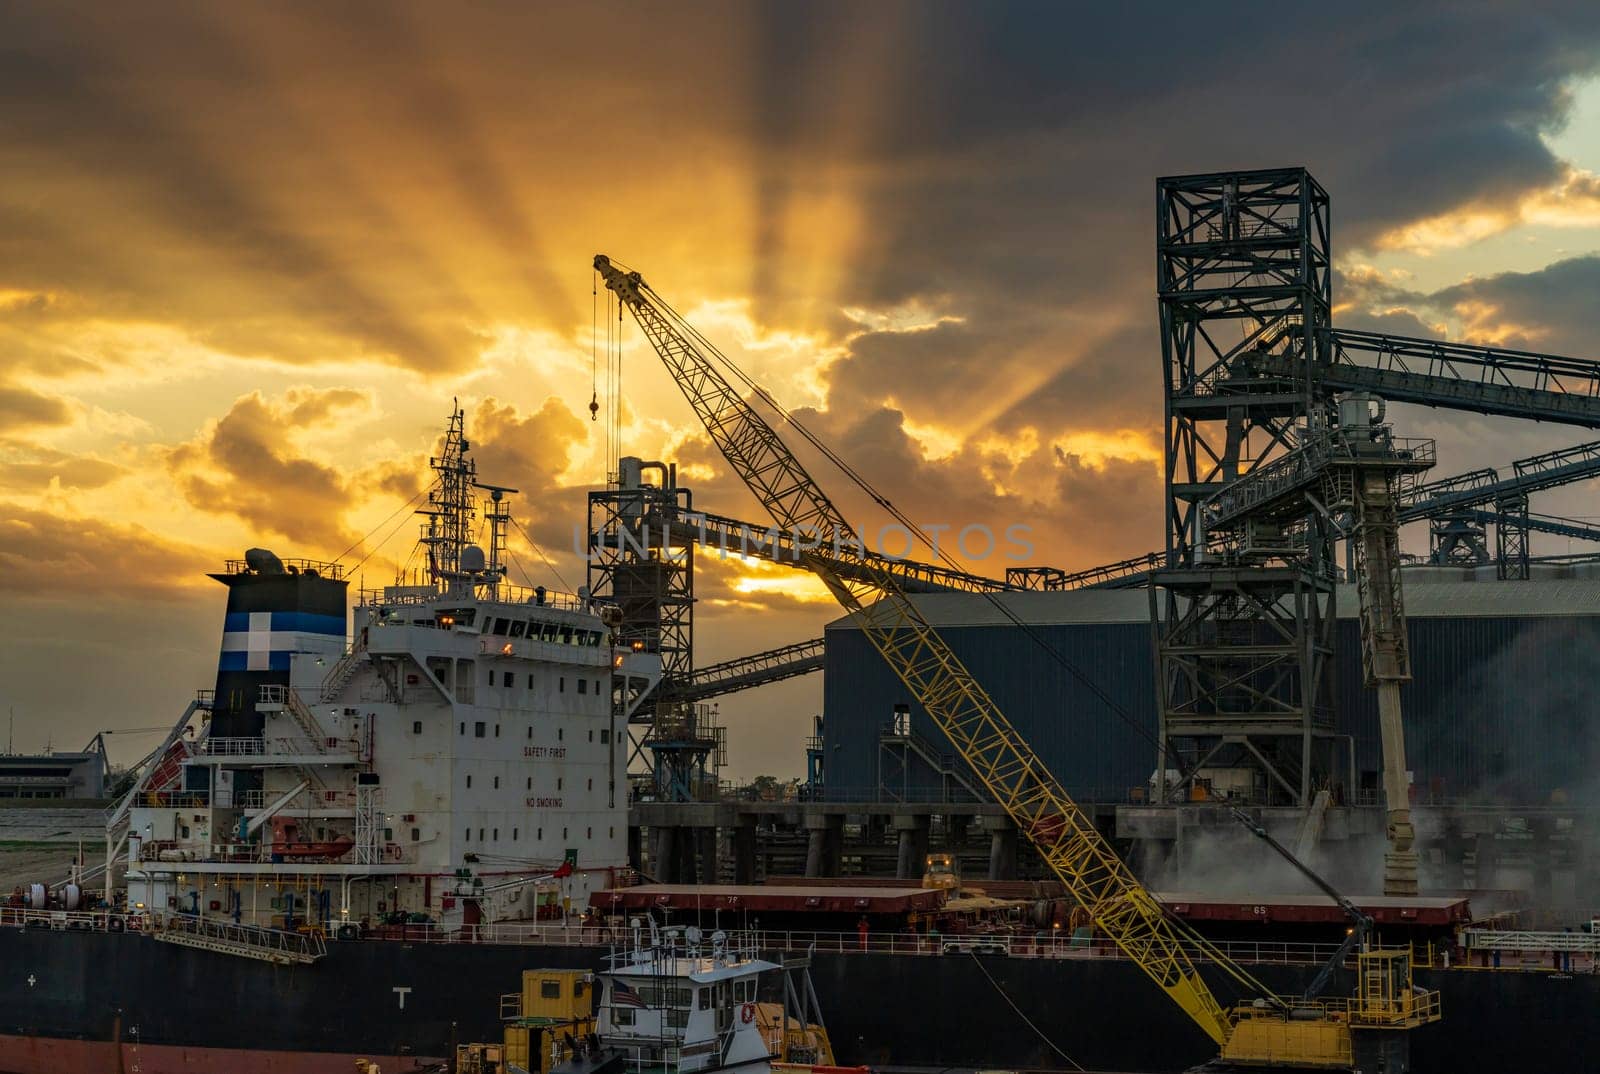 Dramatic sunset over the machinery of loading dock at Port Allen by the Mississippi river in Baton Rouge Louisiana